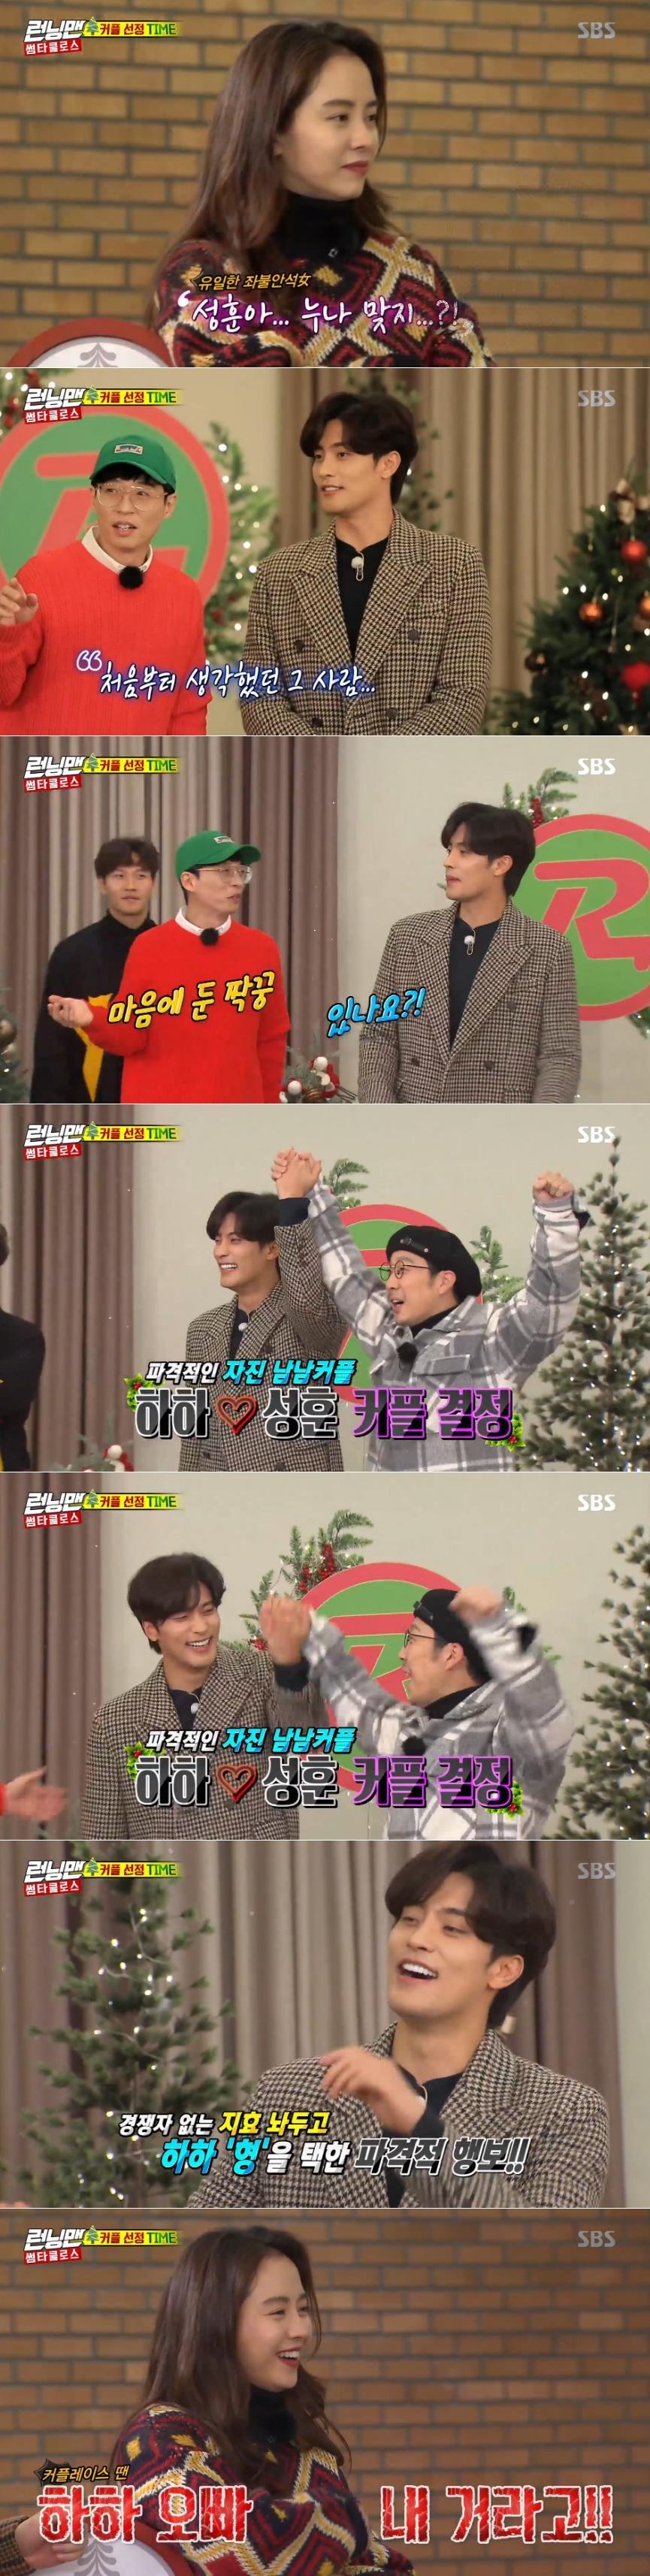 Actor Sung Hoon revealed the wrong charm by Spider Lilies for the South-South couple.SBS Running Man, which was broadcast on December 23, was featured in Thumb Taclos. The concept of Thumb was recorded for the Christmas season.In this special feature, stars who are active in various fields came together as guests.When singer Hwang Chi-yeul appeared, actors Song Ji-hyo and Jeon So-min expressed their desire to pair together.Hwang Chi-yeuls Choices partner was Jeon So-min.The second guest was actor Jeon Hye-bin; in front of Jeon Hye-bin, singer Kim Jong-kook and broadcaster Ji Suk-jin stood.Ji Suk-jin was teased by members for showing no confidence in the confrontation with Kim Jong-kook.I want to give my brother a chance, said Jeon Hye-bin, who expressed his ambition to show me power.The top model was put on the push-up with Jeon Hye-bin, but as soon as Jeon Hye-bin sat down, he could not stand and fell on the floor.Jeon Hye-bin encouraged him to still hold on a lot; his opponent, Jeon Hye-bin, chose, was Ji Suk-jin.Actor Han Sun-hwa also appeared as a guest in the reception of the cast.The member who wanted to be a couple with Han Sun-hwa was comedian Yang Se-chan and actor Lee Kwang-soo.Han Sun-hwa said he cited both as members who wanted to be a couple in a pre-meeting with the production team, and Choices Lee Kwang-soo.The next guest was actor Park Ha-na; when he saw Park Ha-na, who appeared on Running Man in three years, the members said they were welcome and long time away.The member who said he wanted to be a match with Park Ha-na was Haha; Park Ha-na rejected Haha Choices, saying he was sorry.The next guest was a member of the group Girls Generation and actor Sooyoung.Sooyoung also apologized to Yoo Jae-Suk, who said he wanted to be a match for himself, saying, Im sorry for your brother. Yoo Jae-Suk said, Choi Sooyoung!I didnt think I was Sooyoung anyway, either, I wasnt either. Thats great. The last guest to appear afterward was actor Sung Hoon.Park Ha-na, who failed to decide on a partner, offered Top Model to Lee Kwang-soo, a partner of Han Sun-hwa.Park Ha-na took Lee Kwang-soos heart away with an attractive triangular poem; Han Sun-hwa was led into solo seat by Lee Kwang-soos hand.Kim Jong-kook, who turned down Yoo Jae-Suk, is in a left-handed seat and has received a love call from Sooyoung.Sung Hoon said, I have thought about it from the beginning.Song Ji-hyo shouted Haha is mine to the unexpected Choices of Sung Hoon, who became a South-South couple in Spider Lilies.Han Sun-hwa finally suggested to Yoo Jae-Suk to be a partner; he then asked Yoo Jae-Suk to build a three-way poem as his name stone.Yoo Jae-Suk was applauded by Han Sun-hwa for creating a senseless triangular poem, Han Sun-hwa, Mr. Sunhwa, why are you out now, angry?Yang Se-chan and Song Ji-hyo became automatically couples.hwang hye-jin